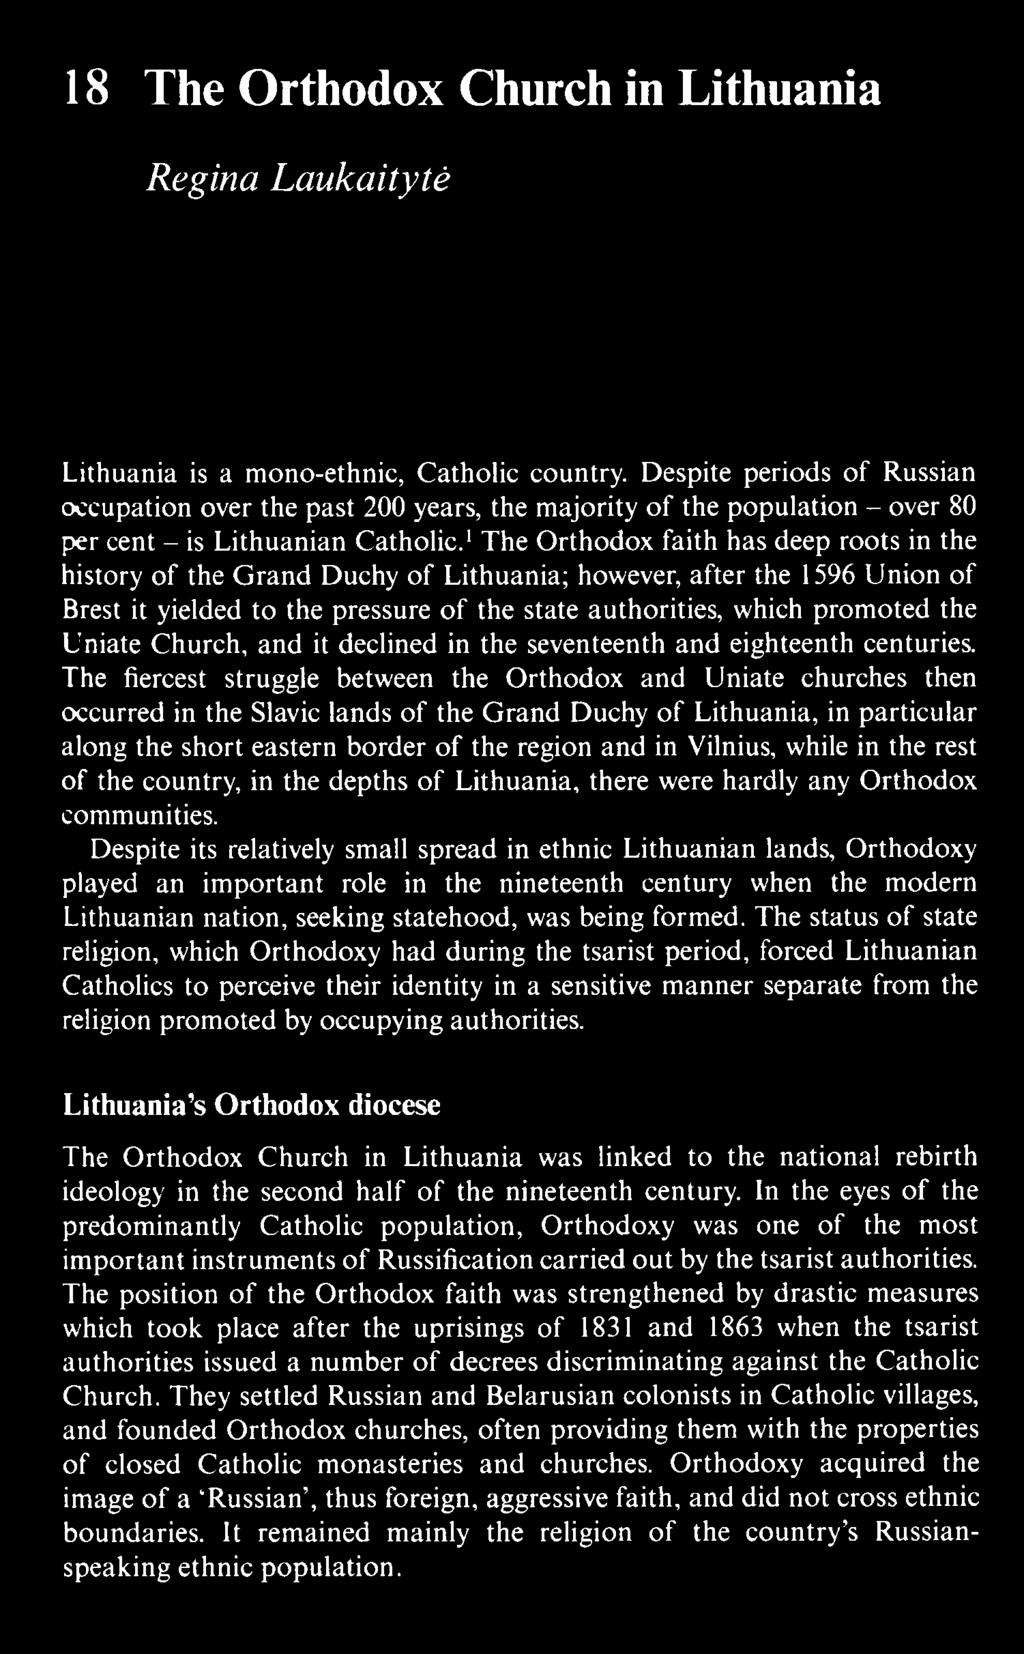 1The Orthodox faith has deep roots in the history of the Grand Duchy of Lithuania; however, after the 1596 Union of Brest it yielded to the pressure of the state authorities, which promoted the